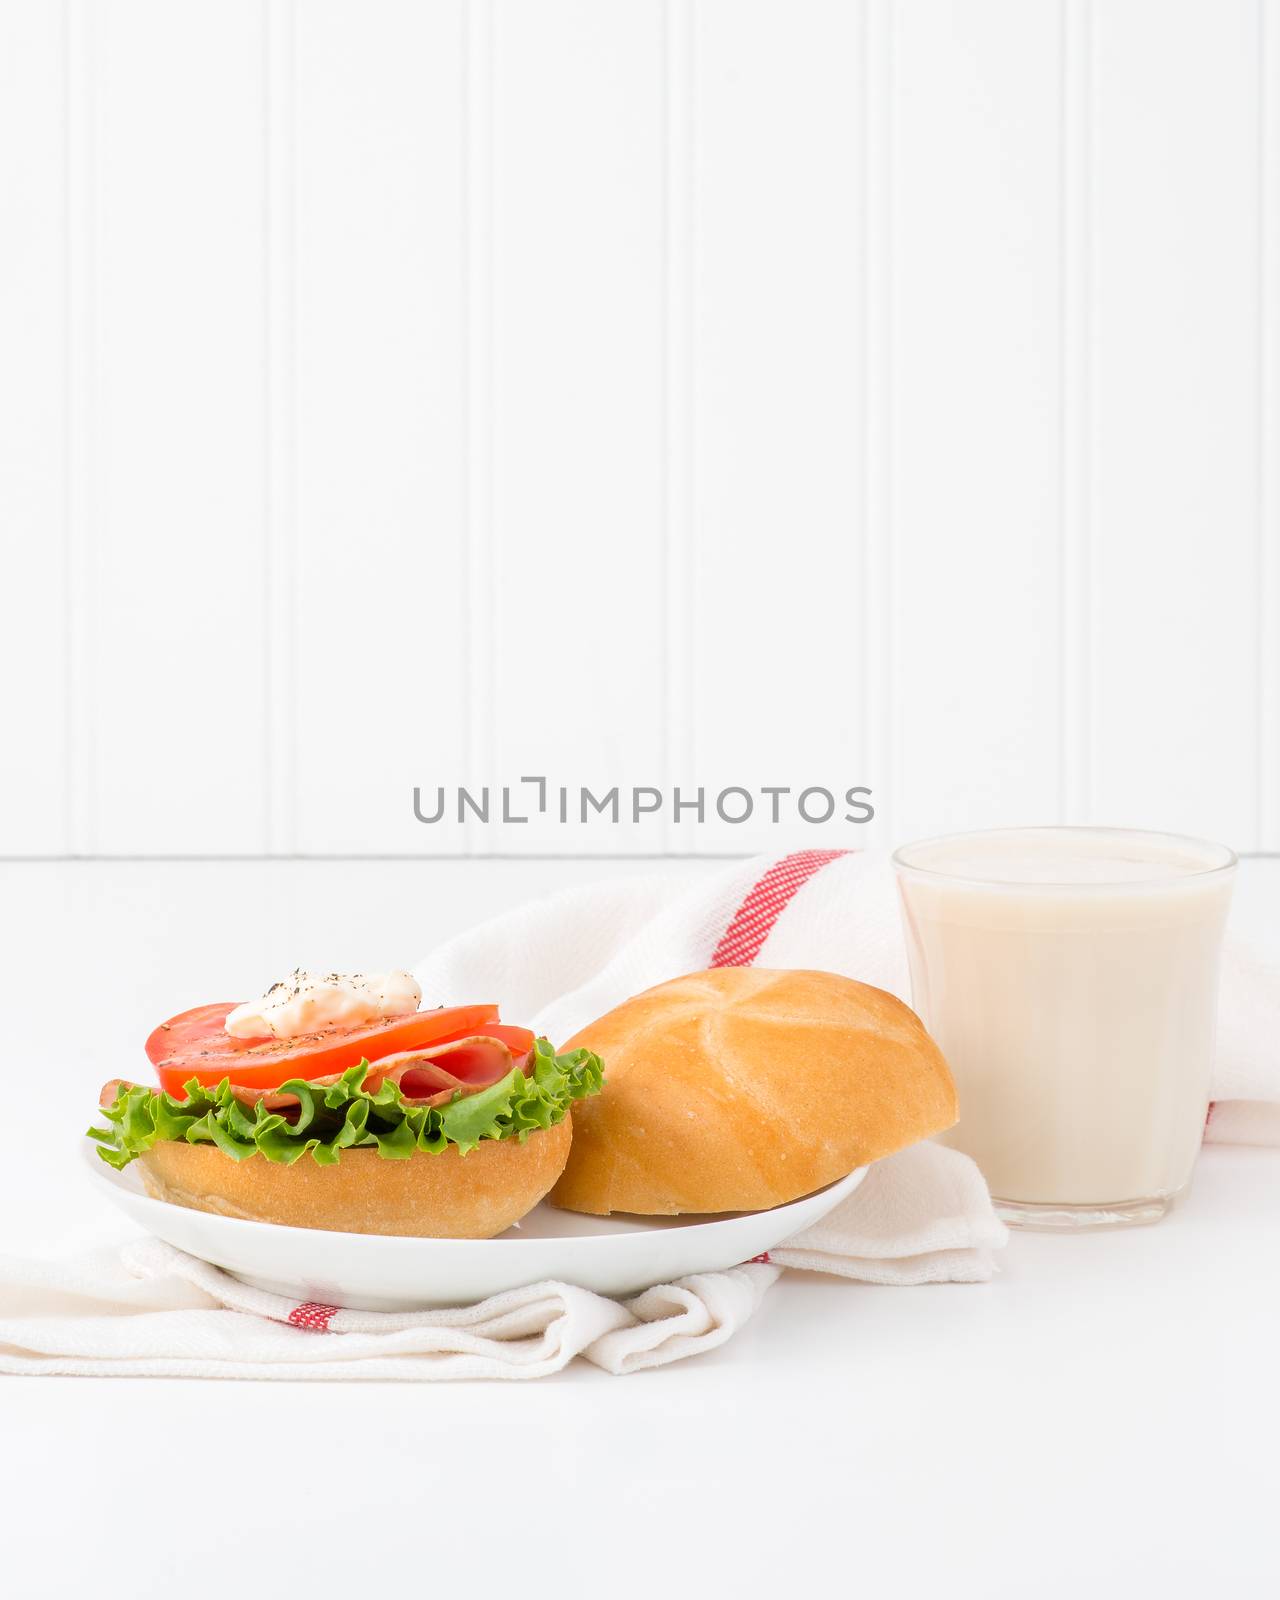 Ham and tomato sandwich on a fresh kaiser bun served with cold milk.